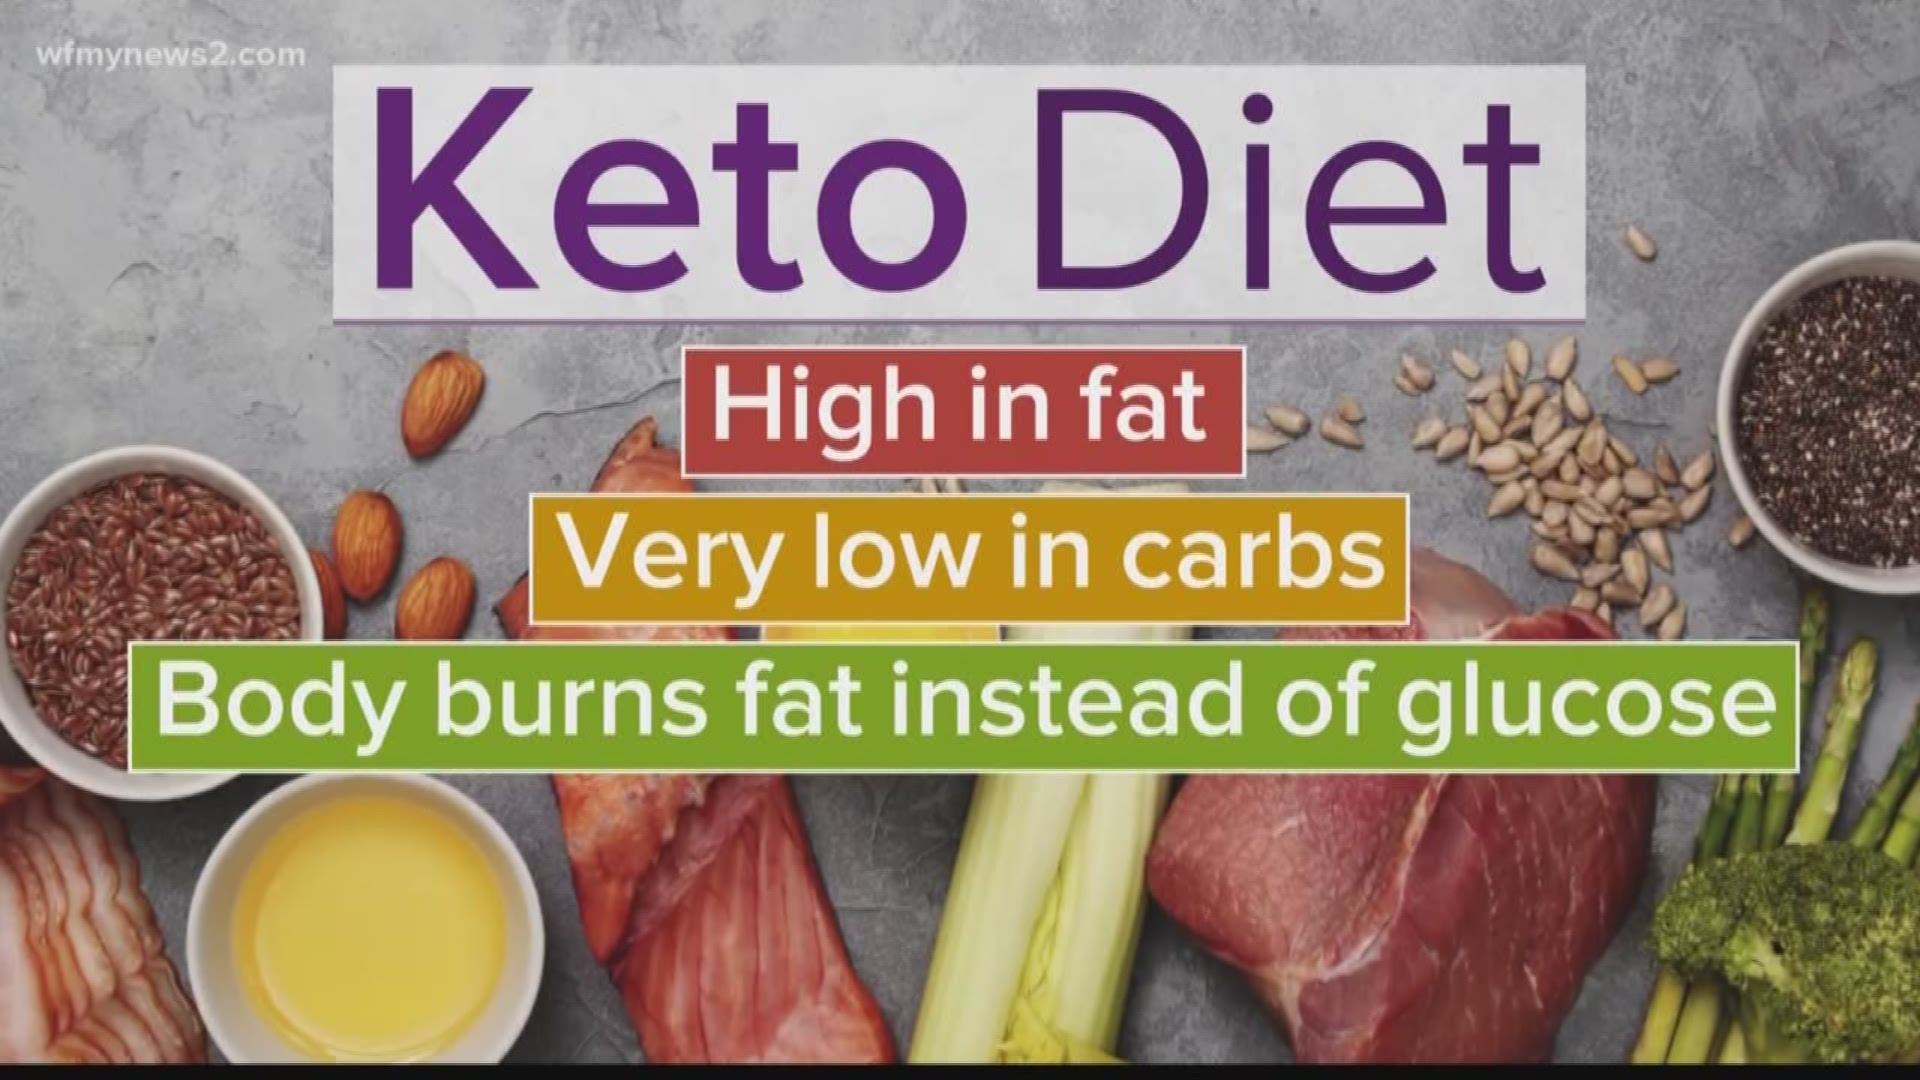 It’s one of the top diet trends, pushing more fat and fewer carbs. Keto is not the safest option for the majority of people.